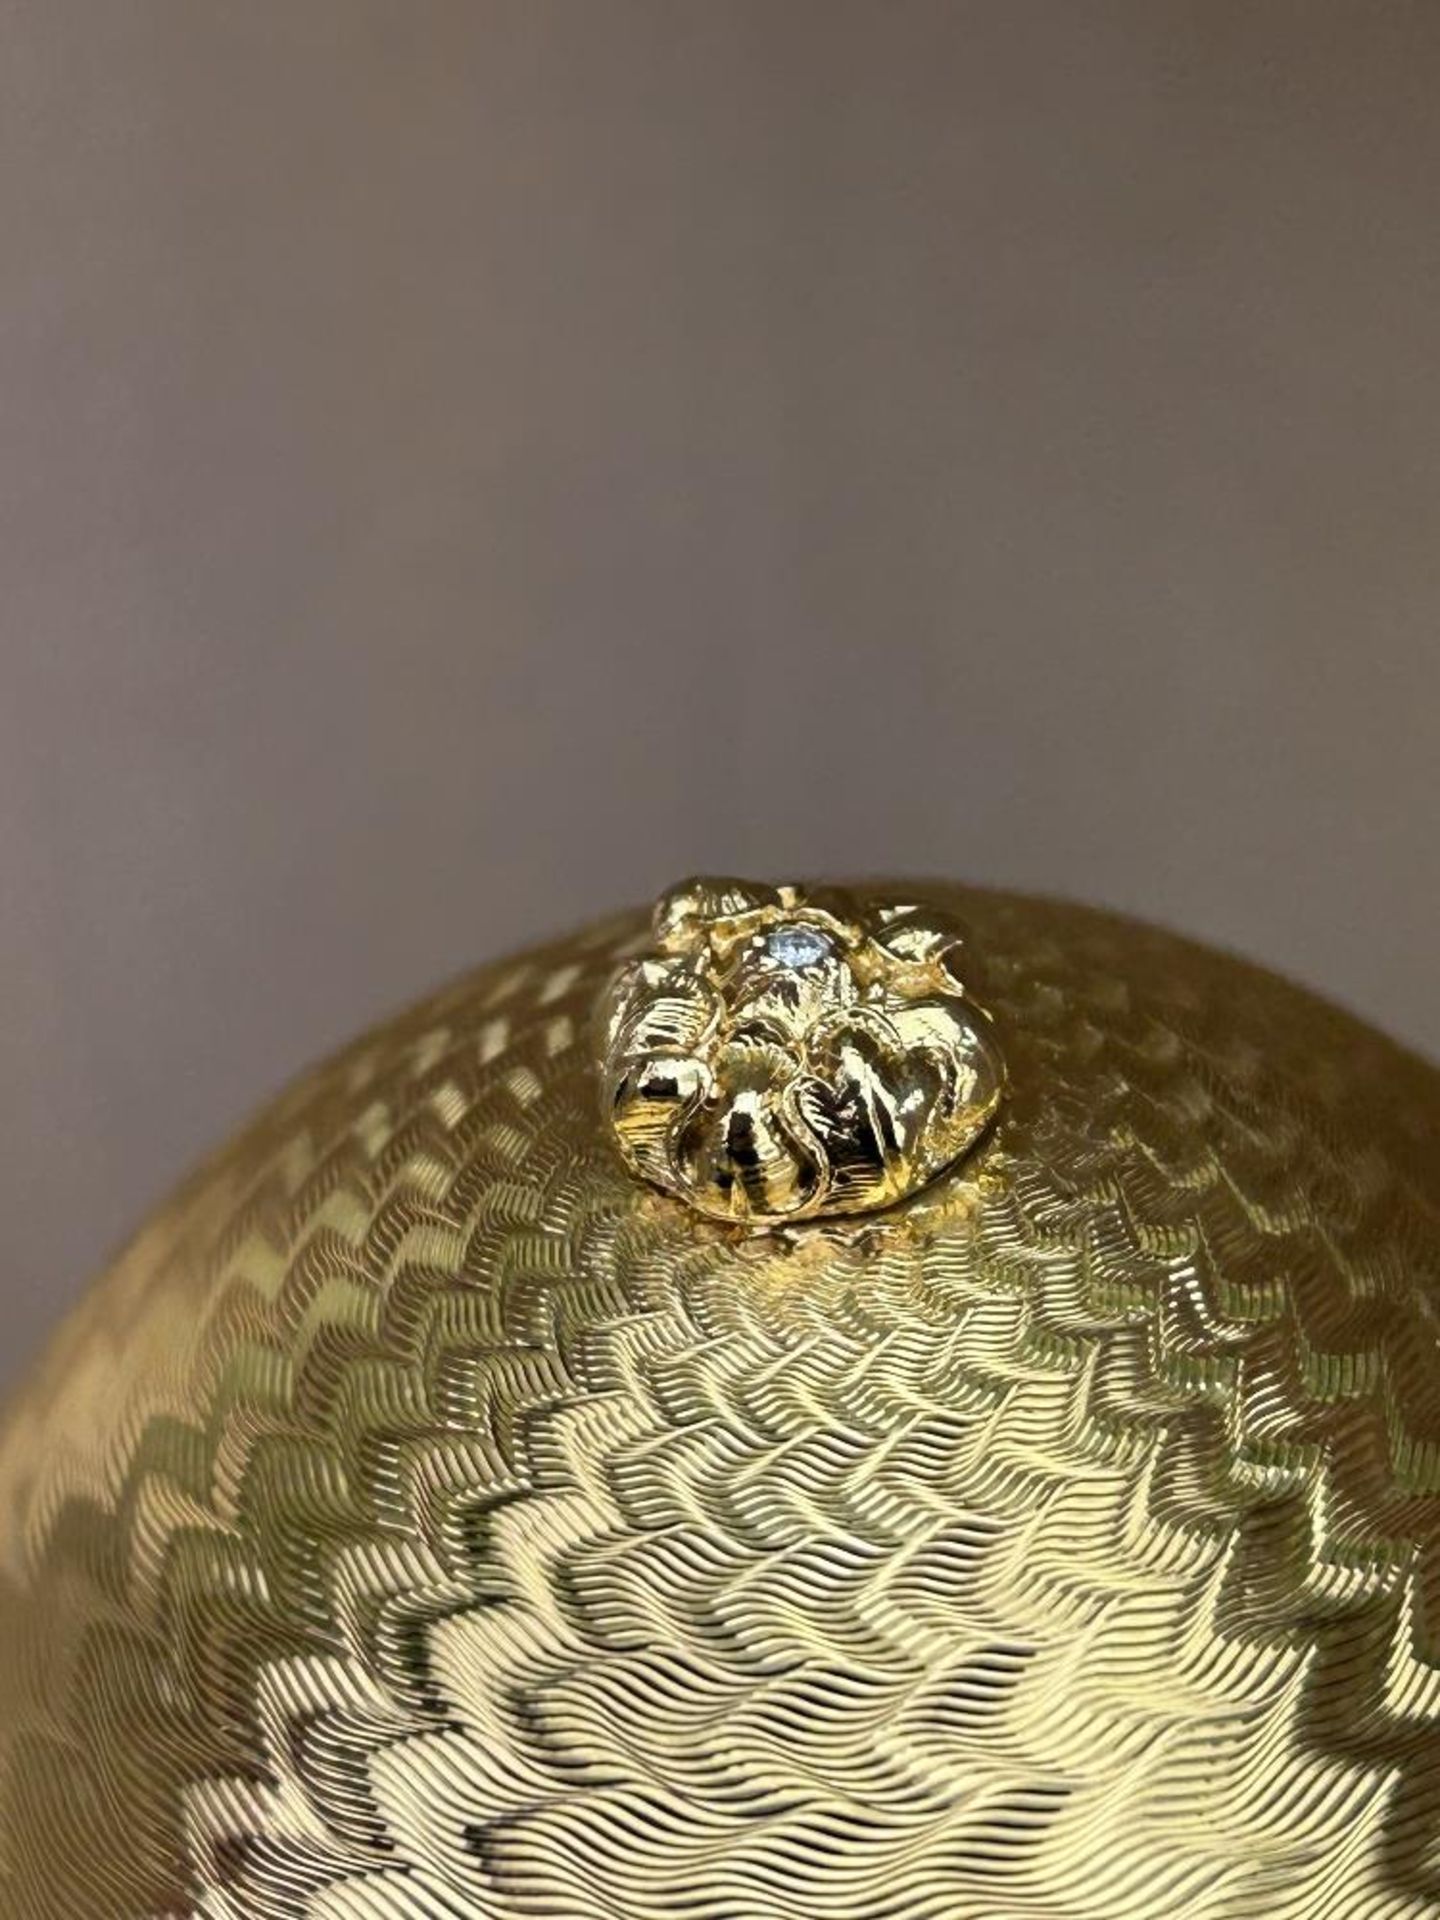 Faberge` 24 Carat Gold Diamond Egg, #12/50 Bletchley Park Edition.WW2 - Image 5 of 10